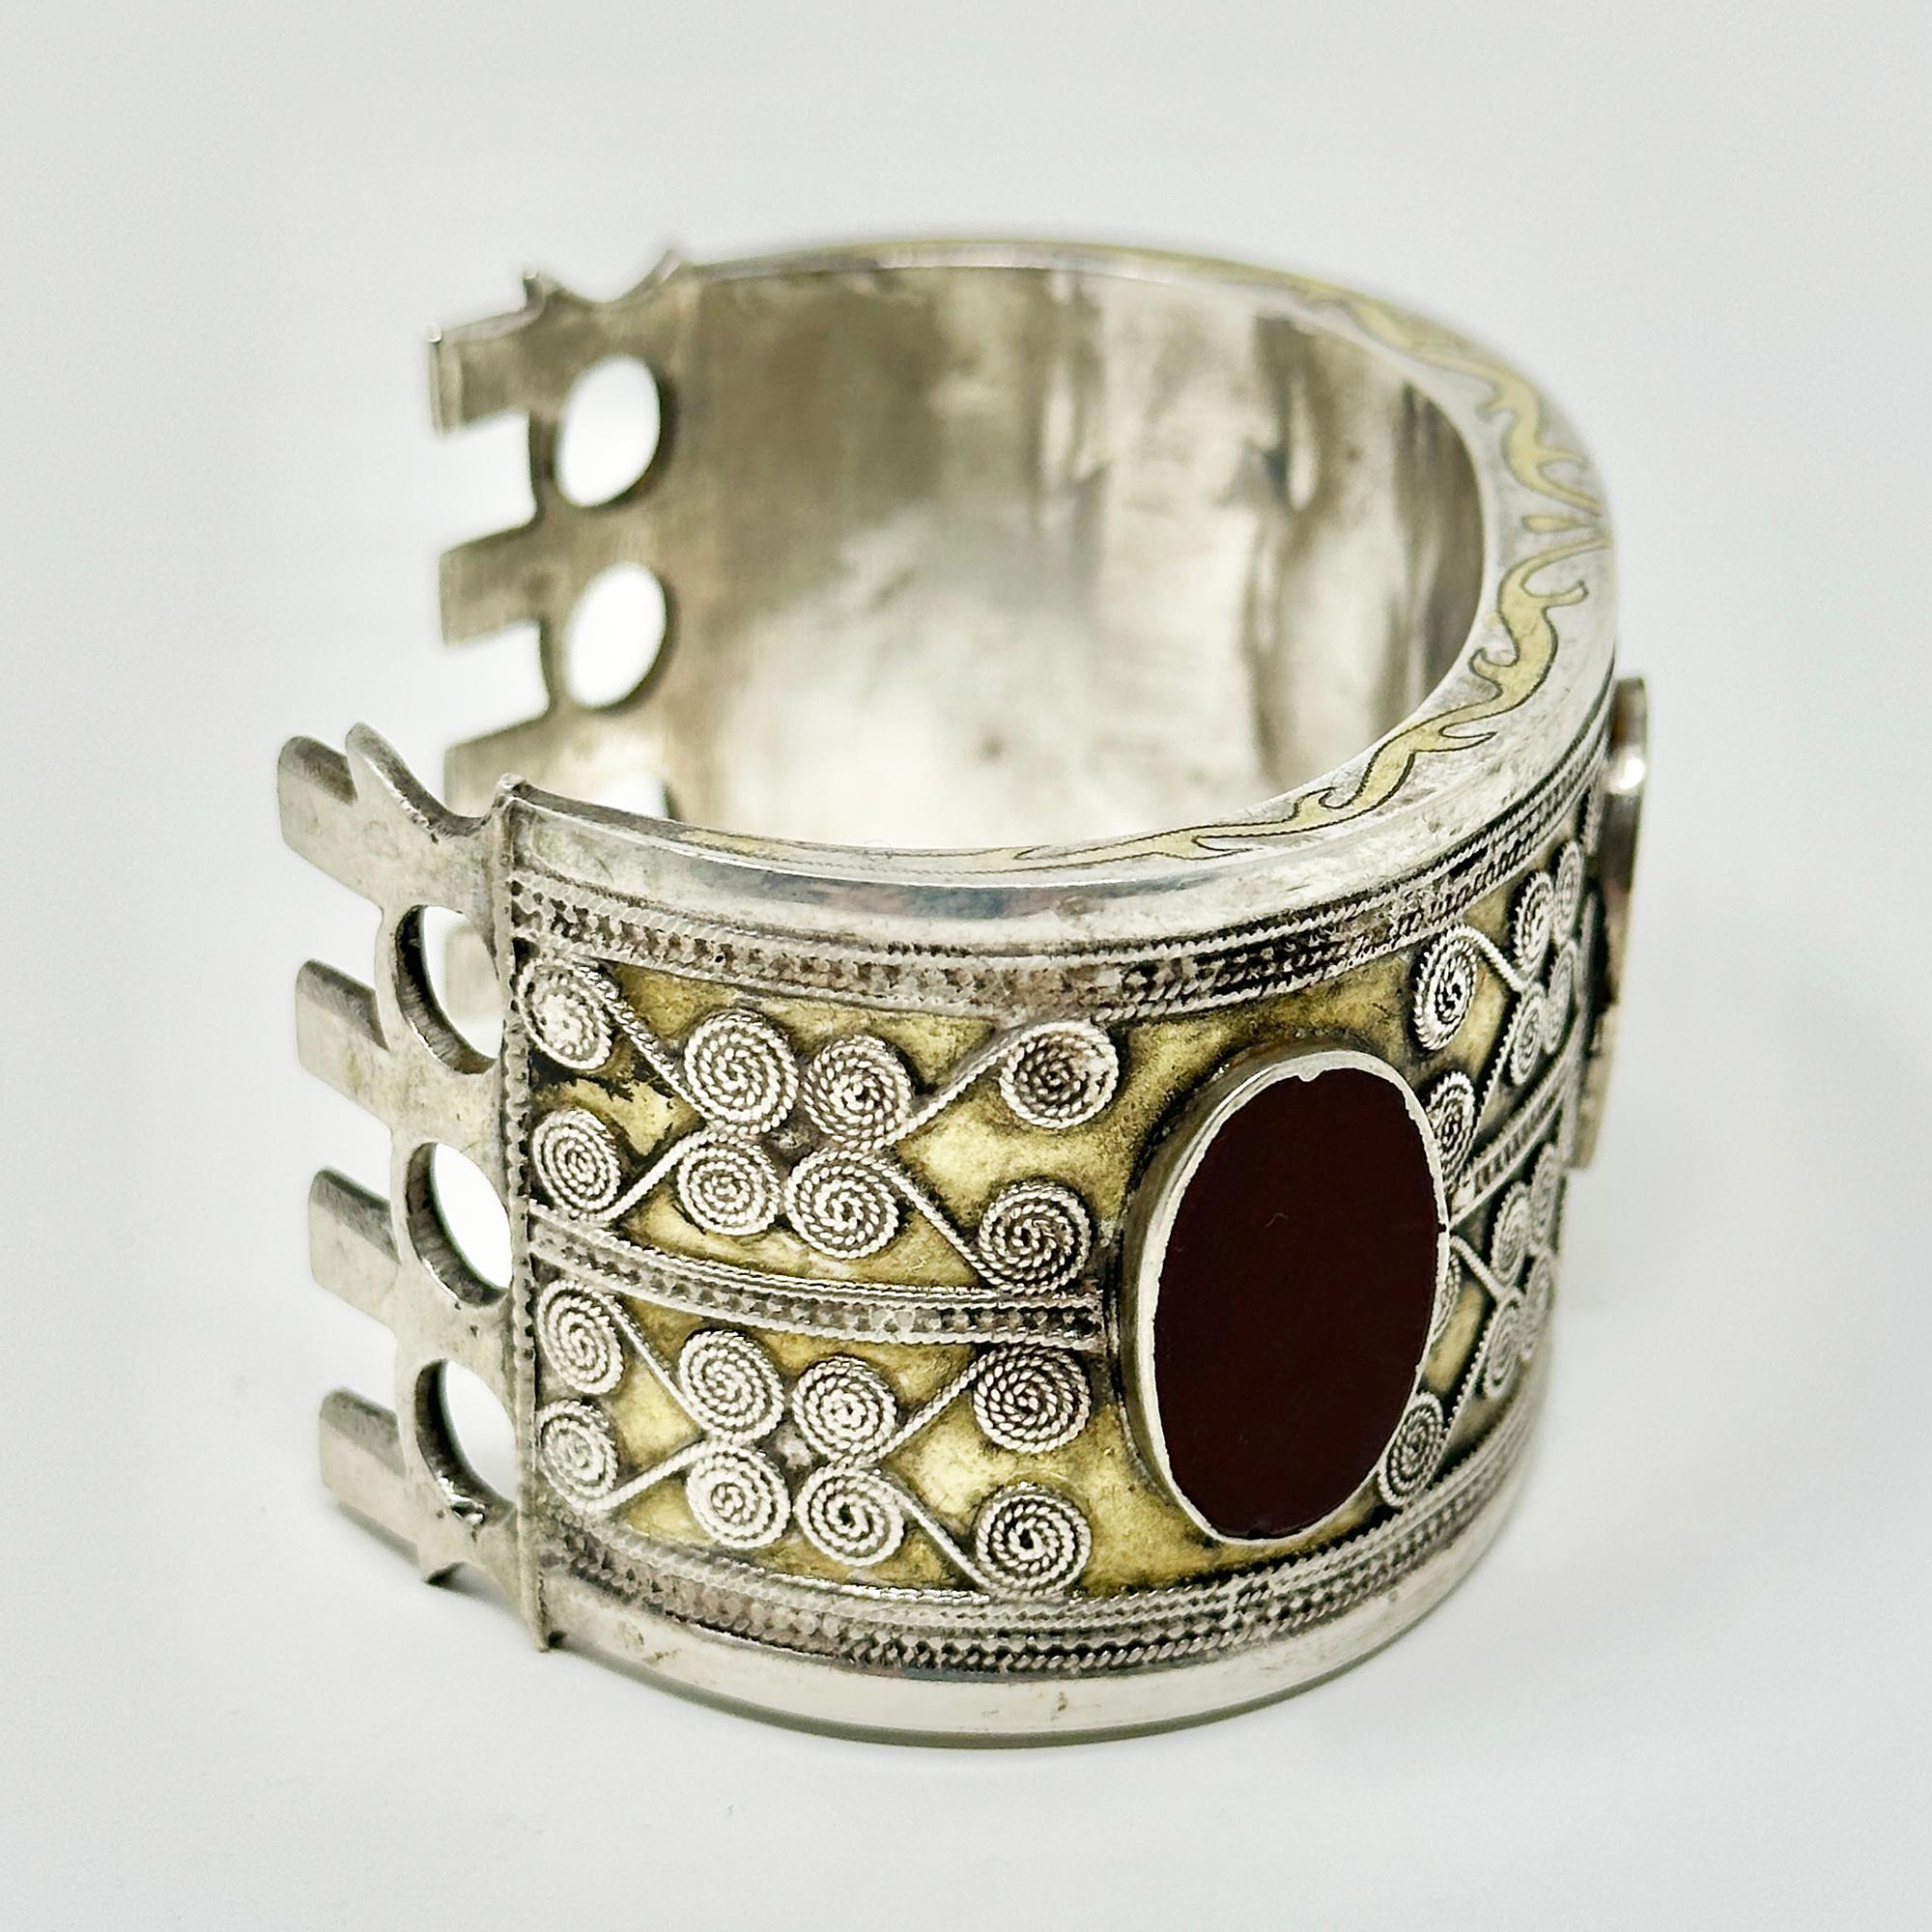 Tekke Turkoman Carnelian and Silver Cuff

A vintage carnelian and silver four-pronged cuff from the Tekke Turkoman with applied silver scrolls and gilding. Interior diameter is 2.5 inches wide, 1-3/8 inches high with a 1.5 inch gap; weight is 110